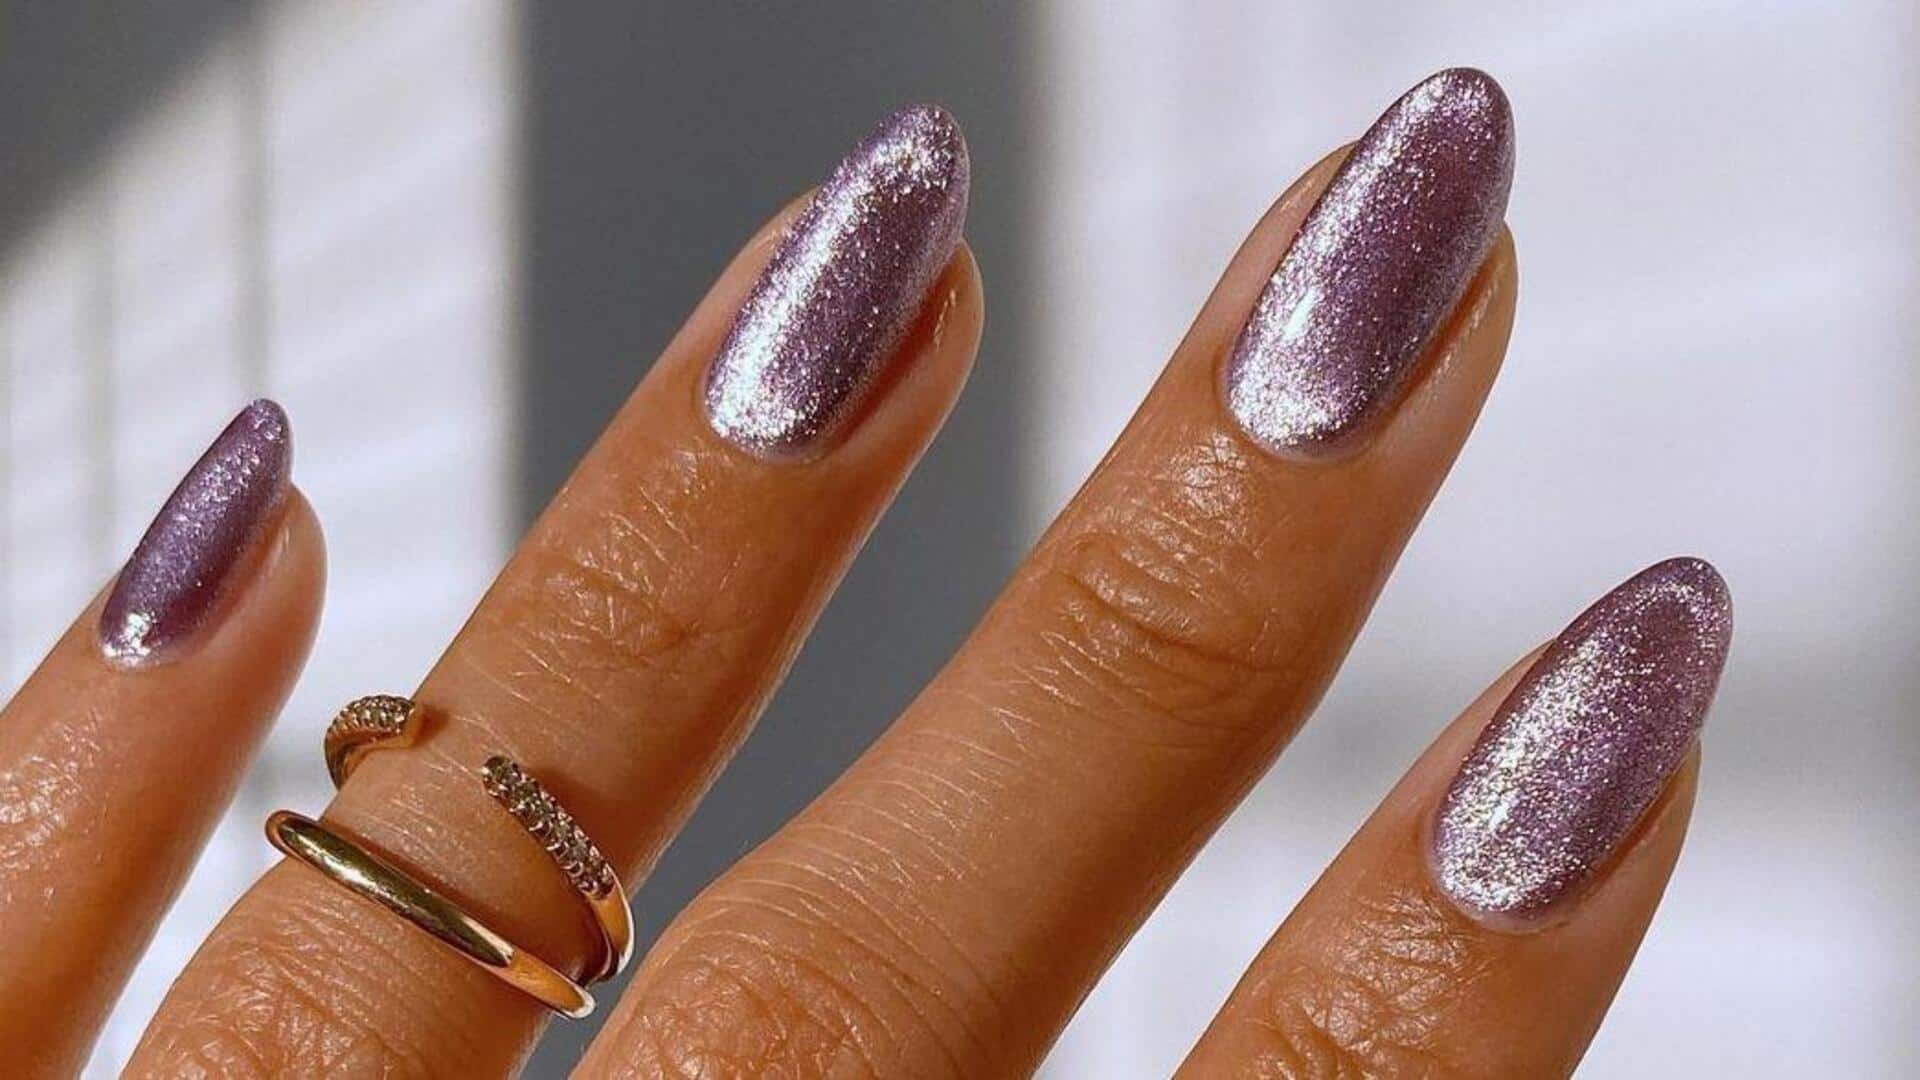 Velvet nails: Where luxurious texture meets artistic expression